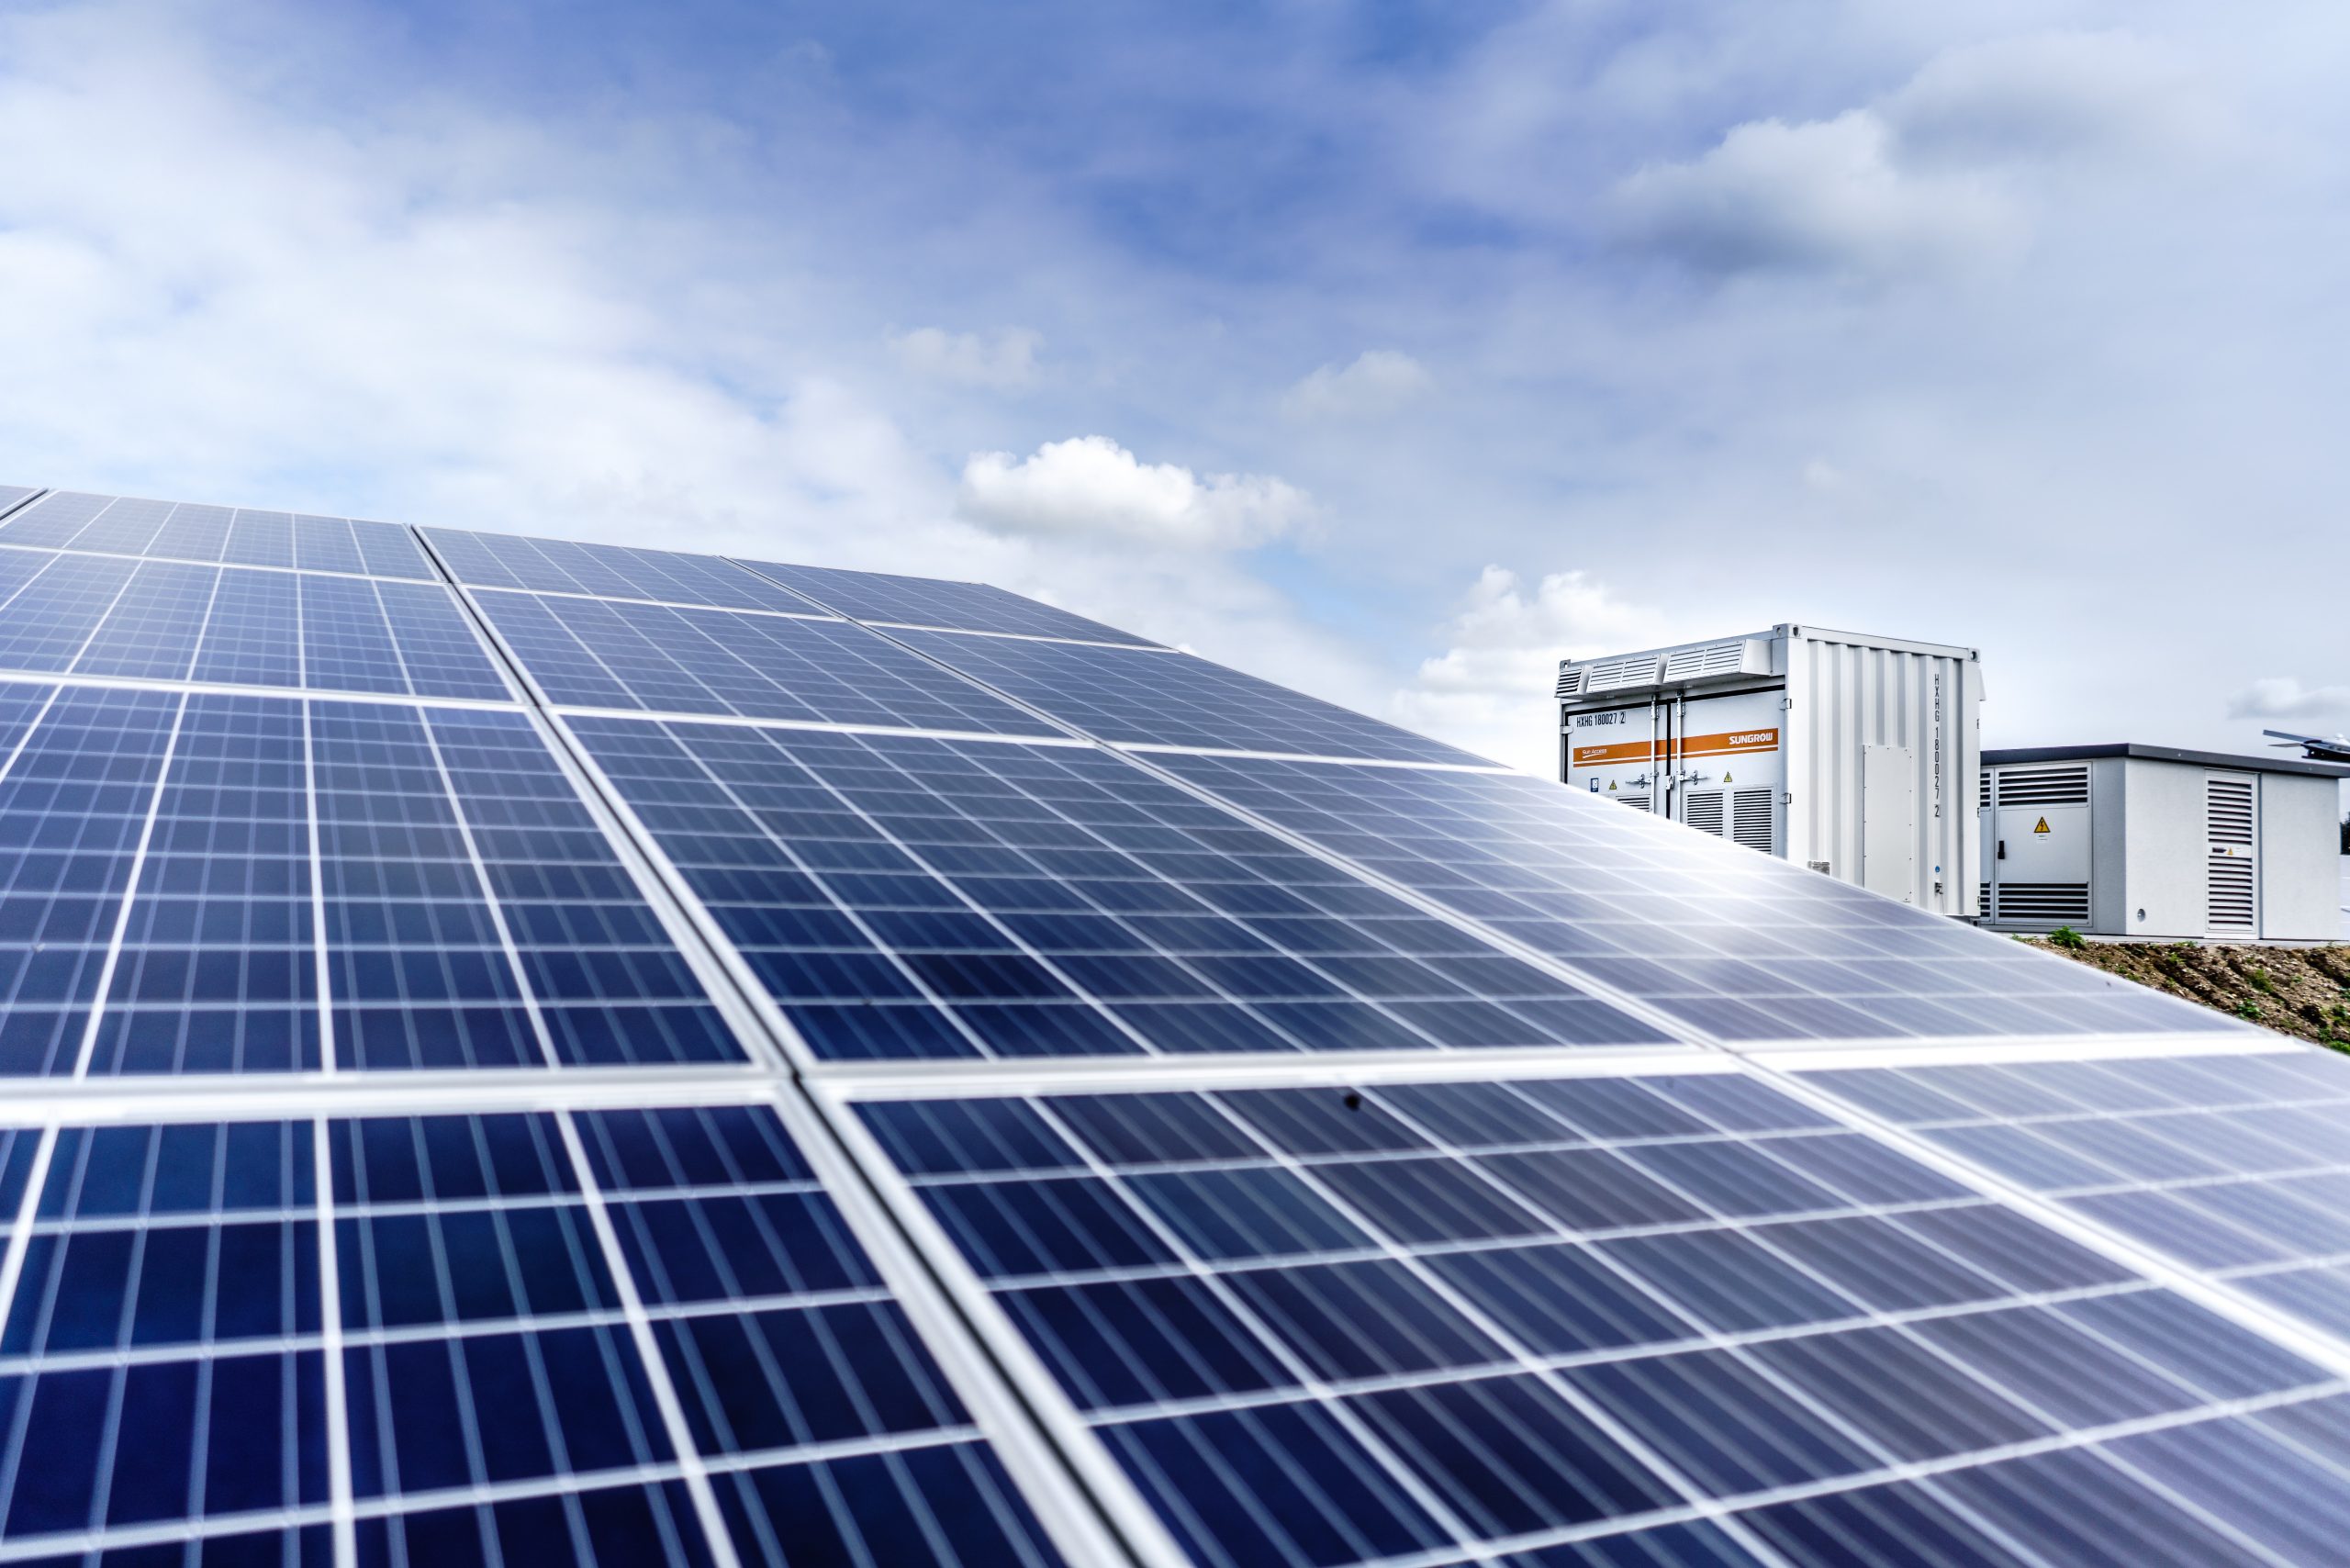 Renewable Energy – Solar PV System for Industrial and Commercial